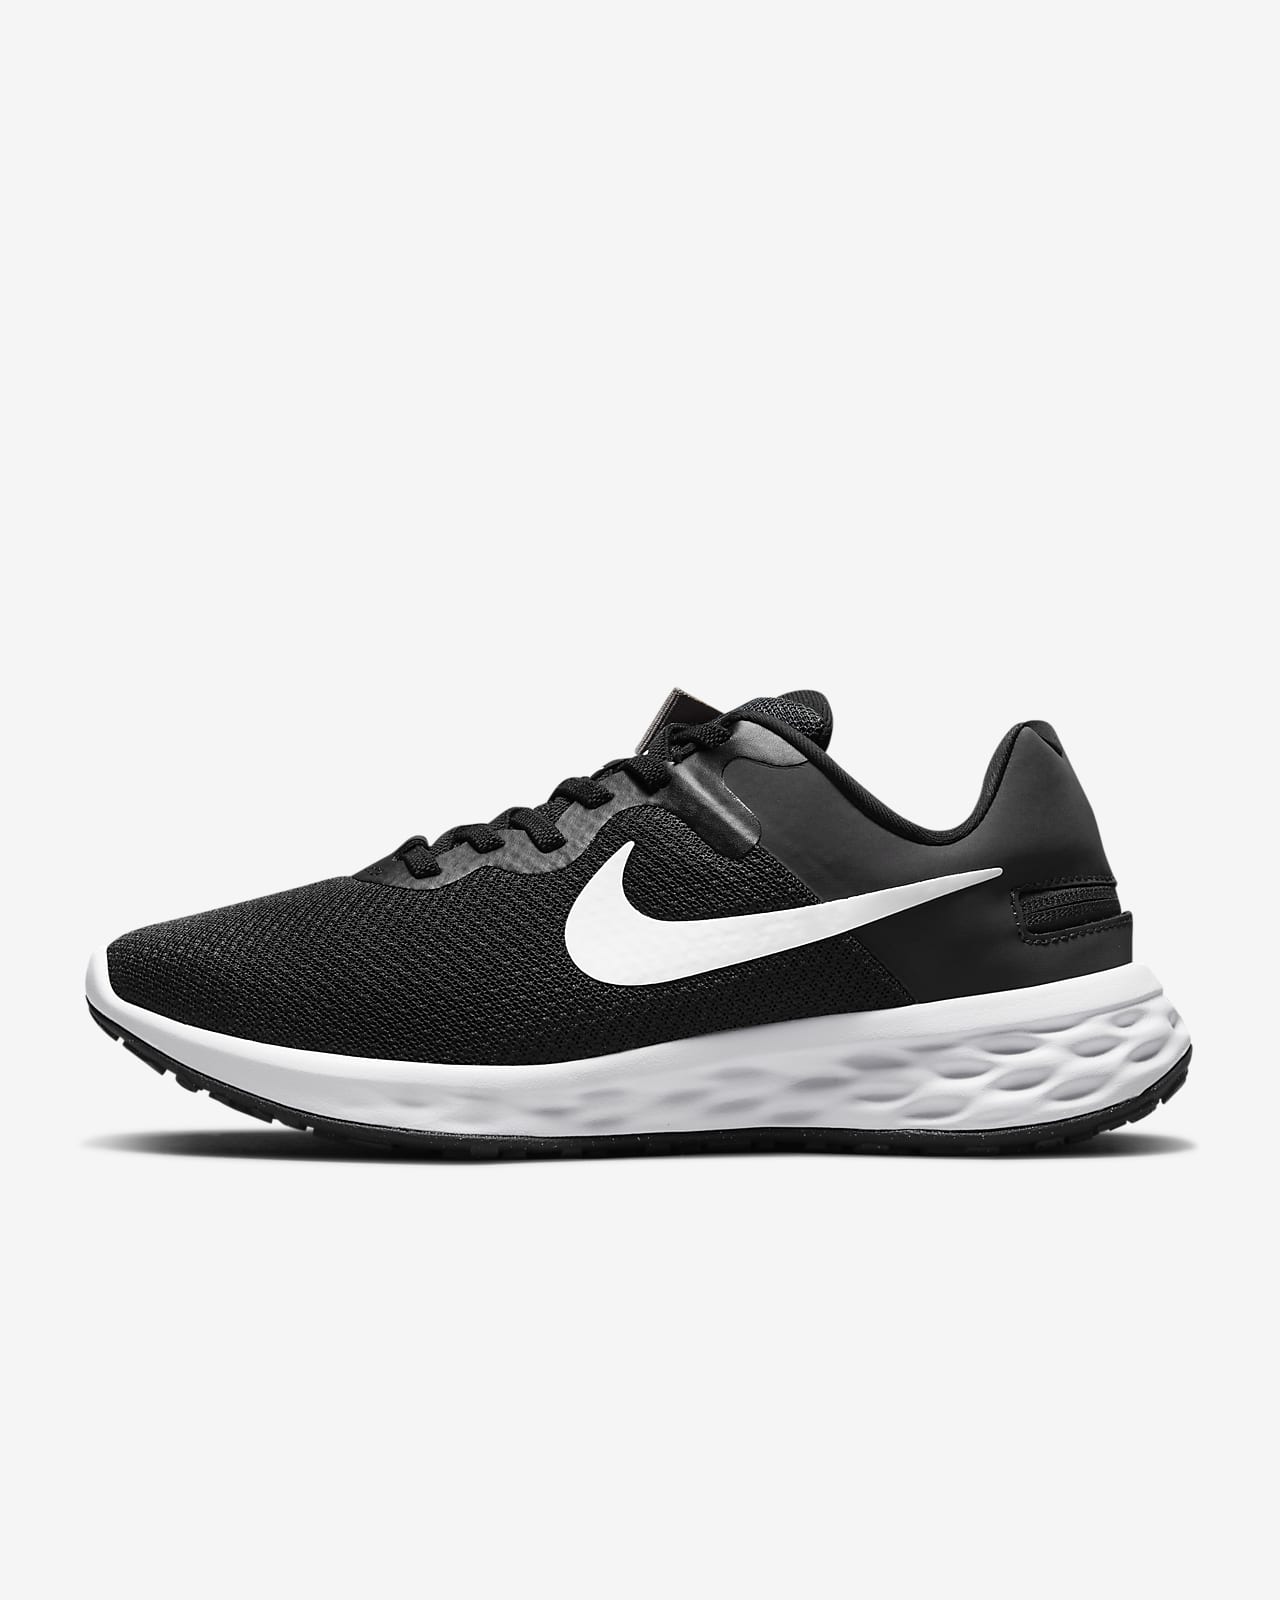 Nike Women\'s Road 6 On/Off Easy Revolution Running Nike FlyEase LU Shoes.